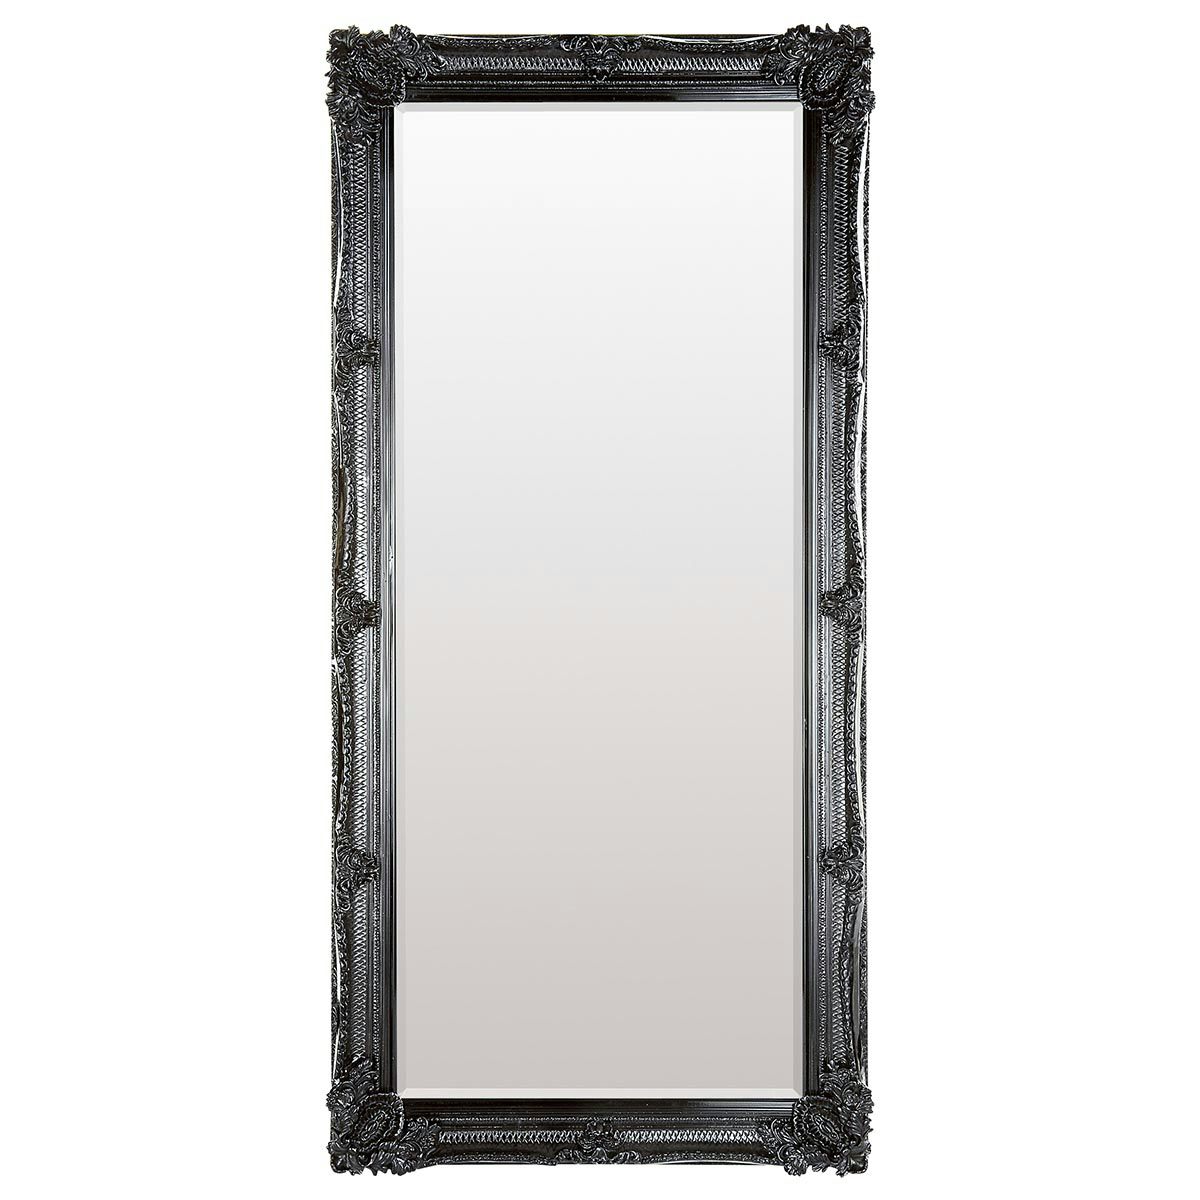 Accents Abbey baroque black leaner mirror 1650 x 795mm